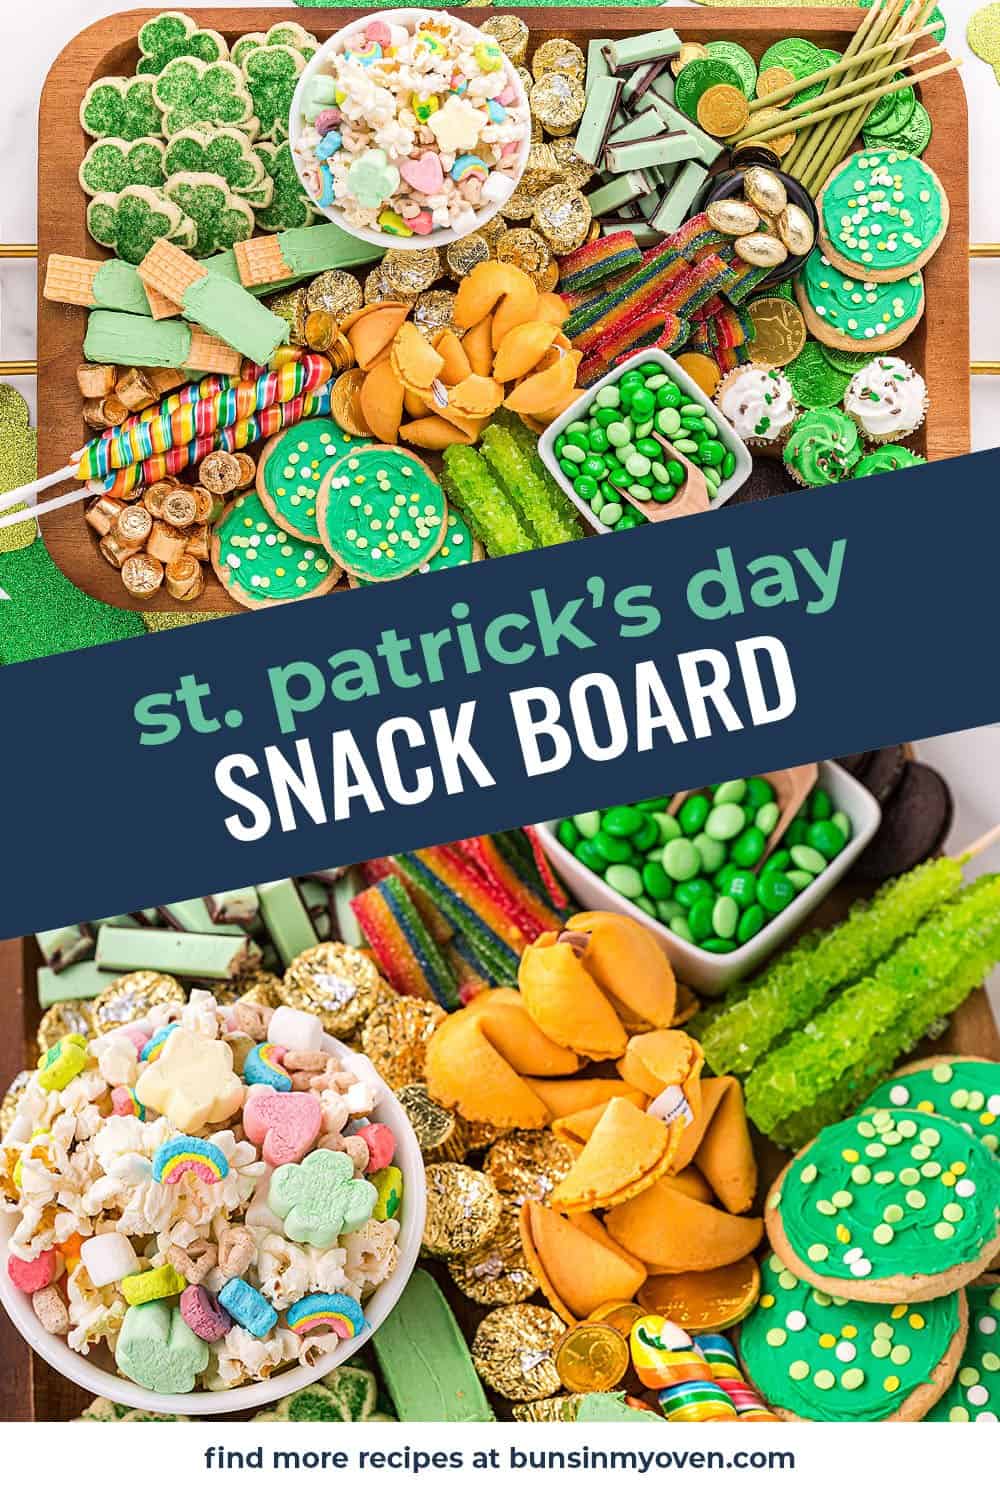 collage of snack board images.